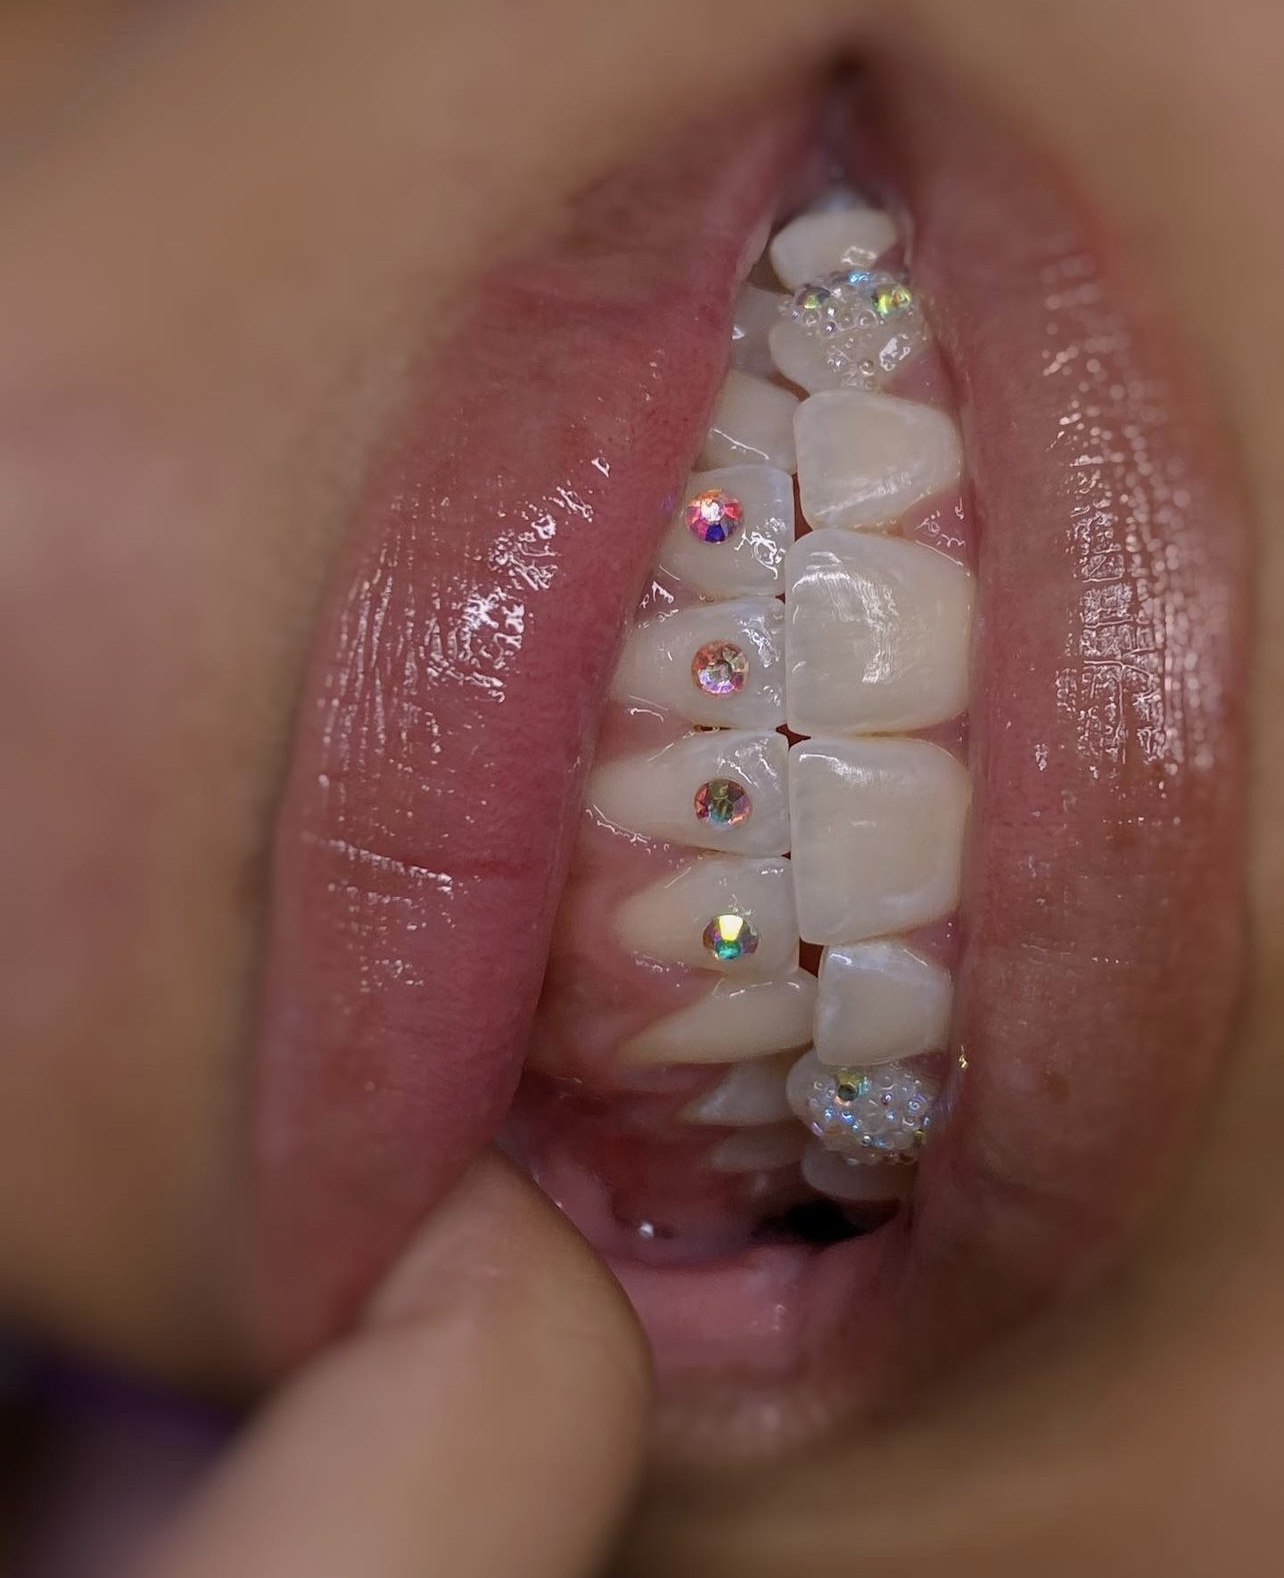 tooth-gem-course — Naturally White PRO